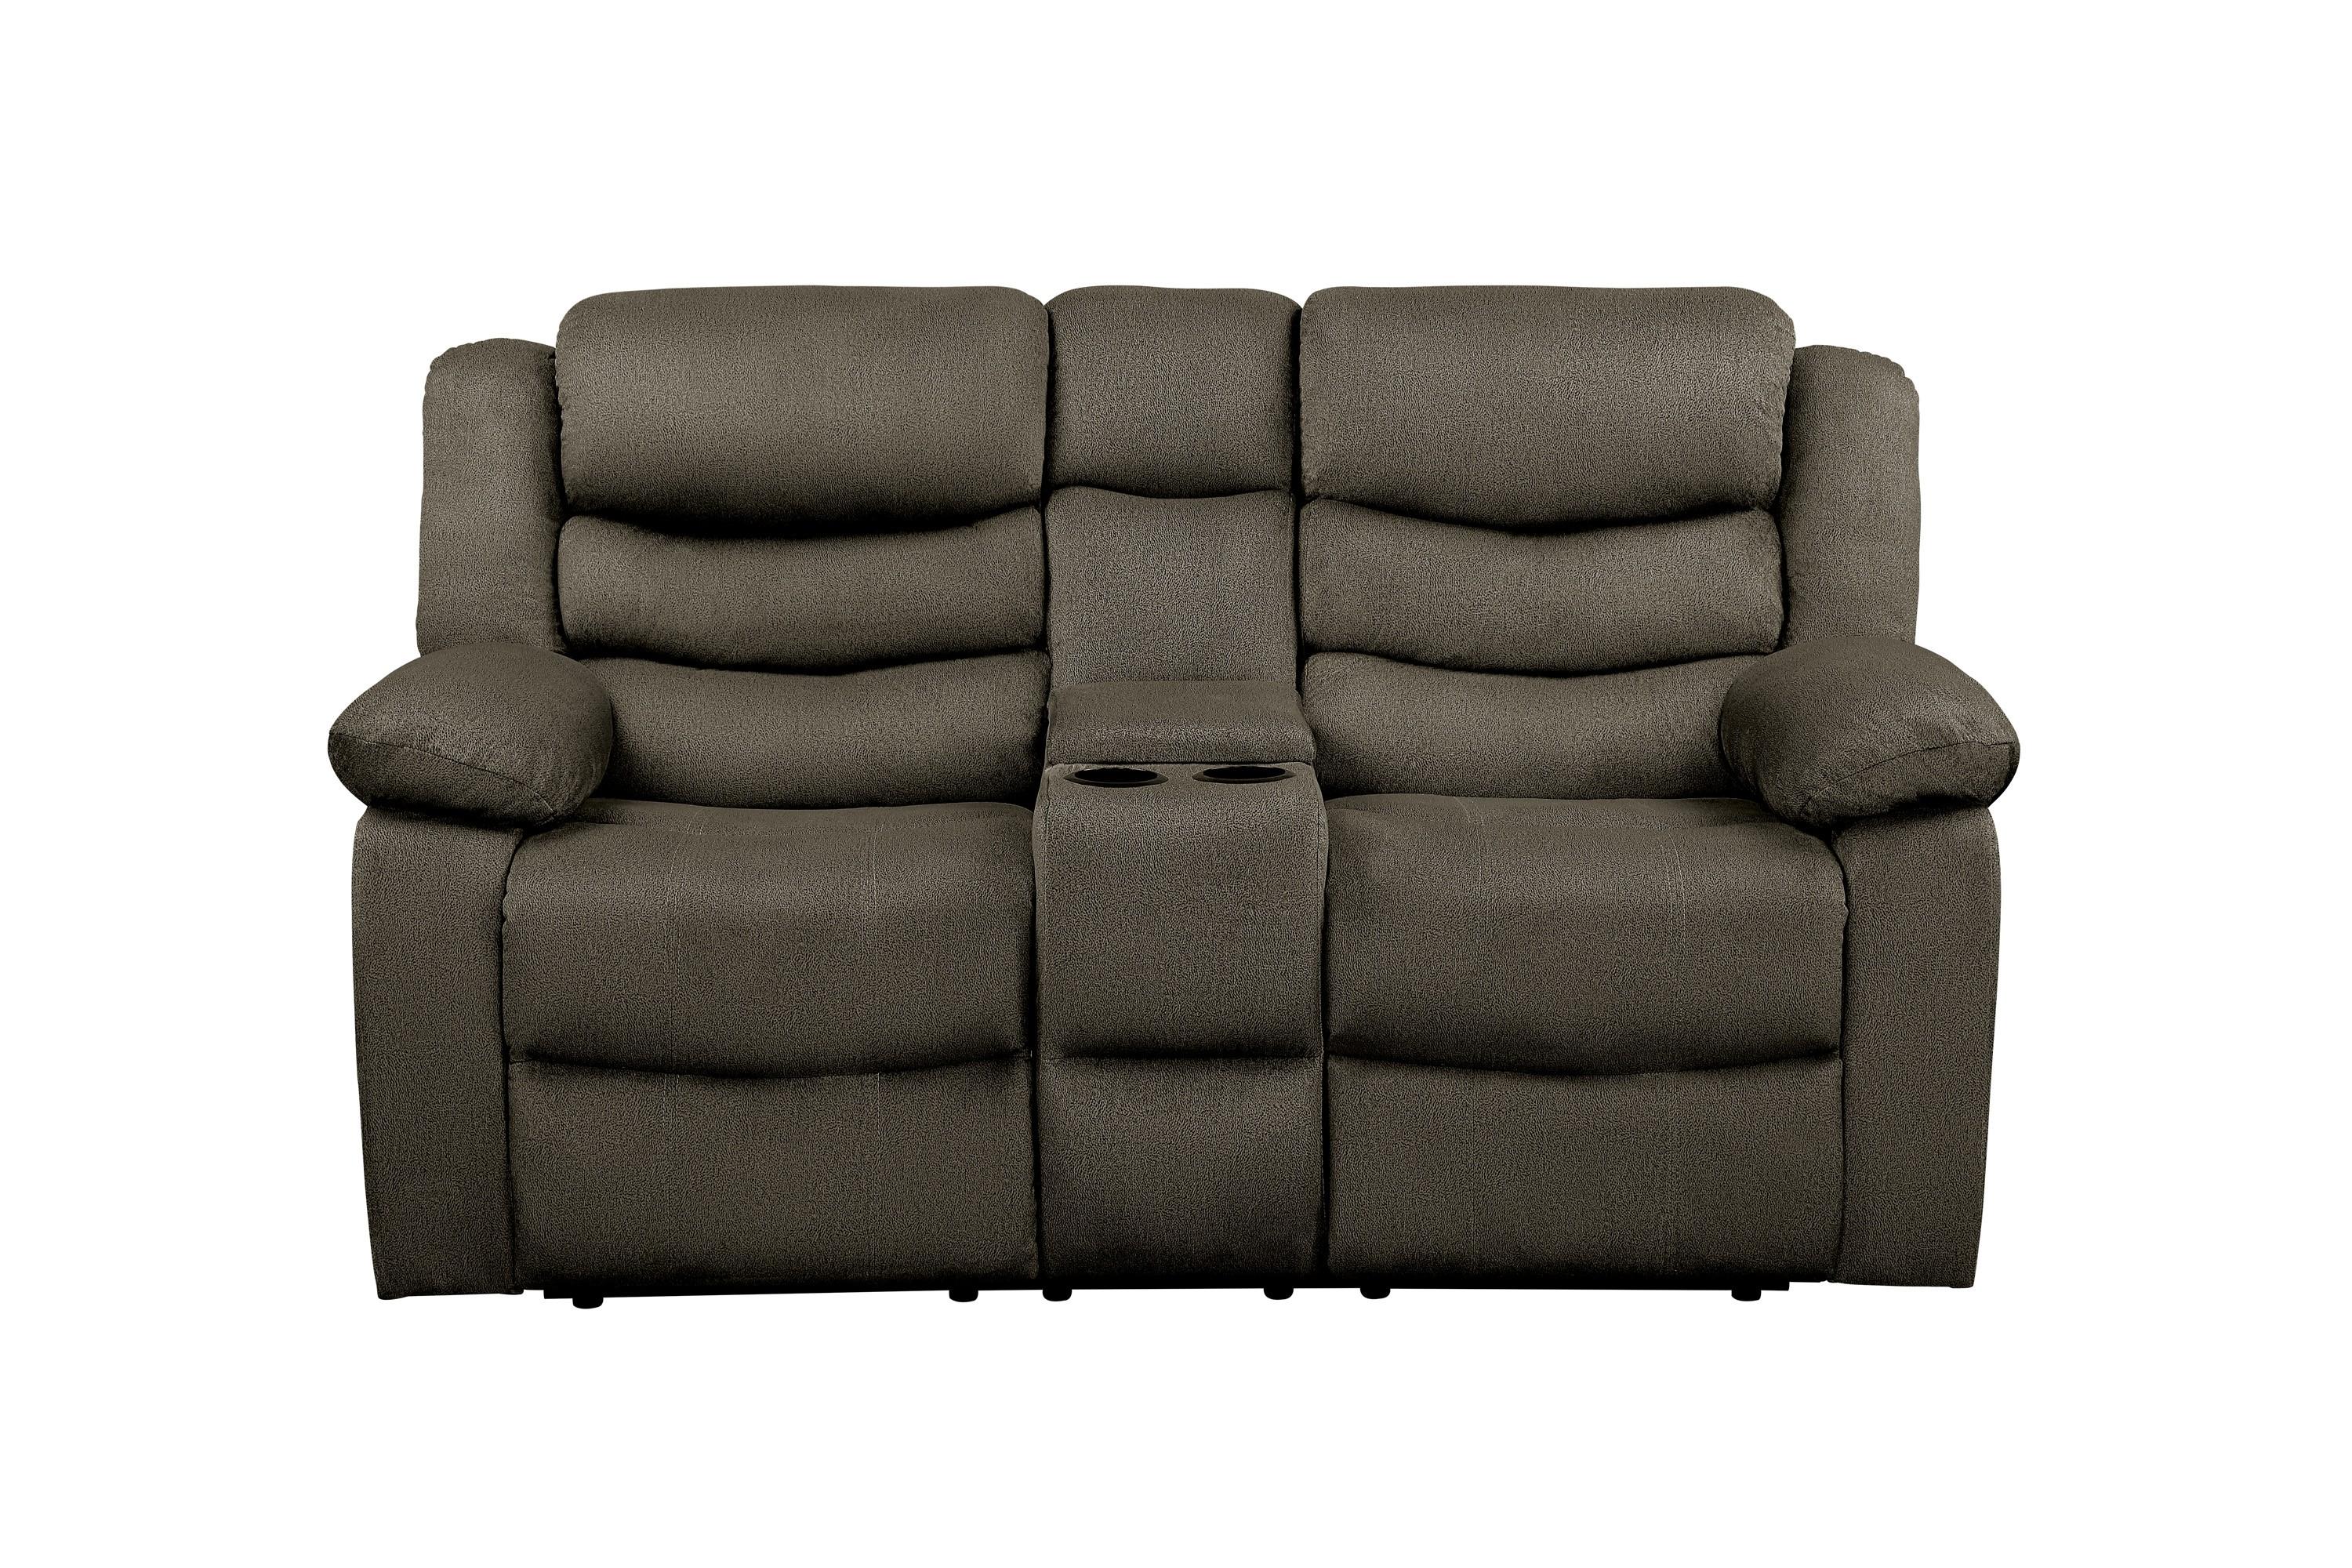 Transitional Reclining Loveseat 9526BR-2 Discus 9526BR-2 in Brown Microfiber